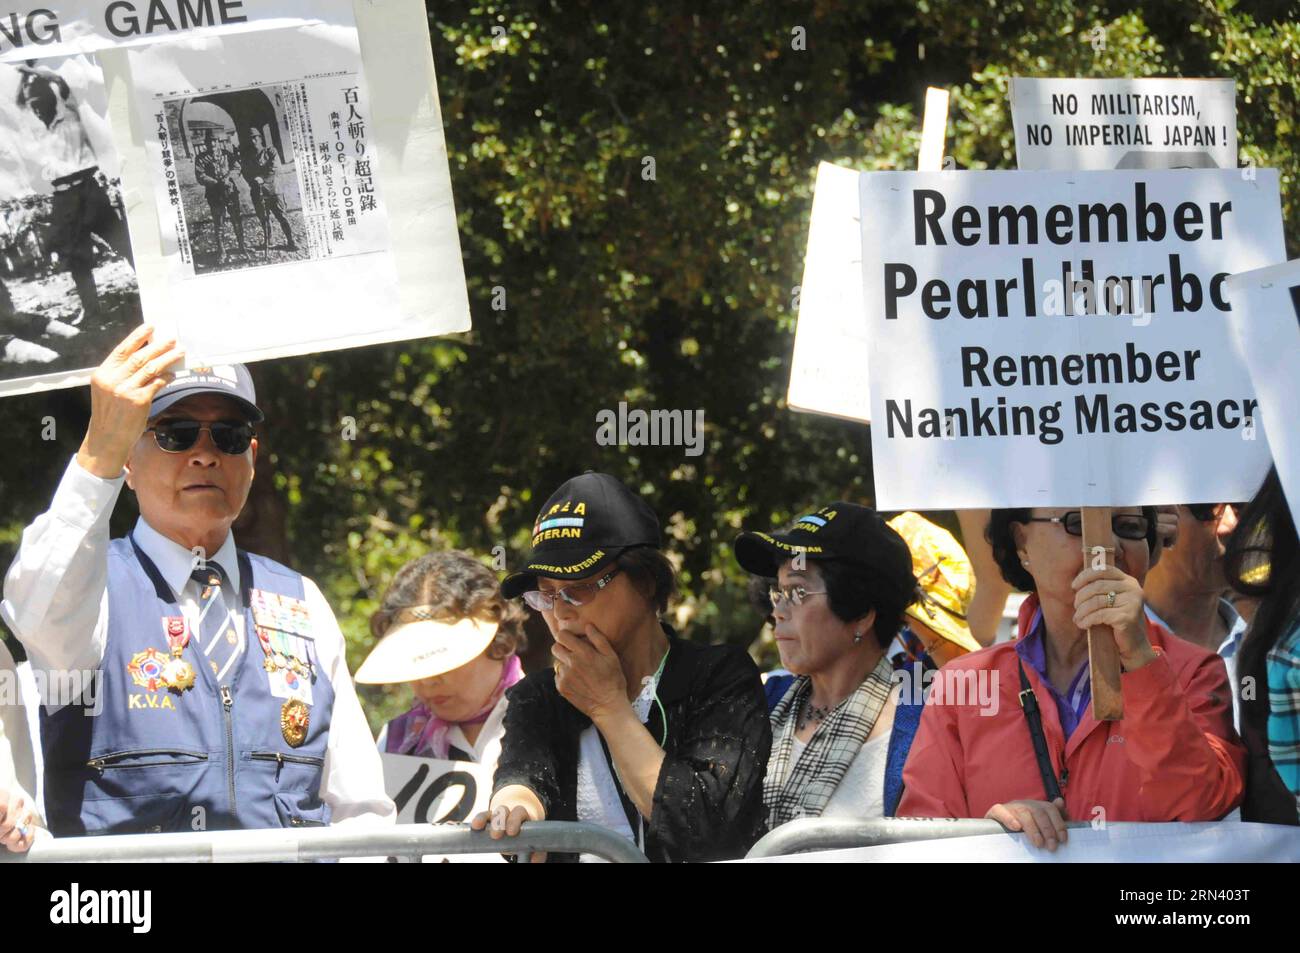 Protesters from Korean community are seen in a demonstration against visiting Japanese Prime Minister Shinzo Abe in Stanford University, California, the United States, on April 30, 2015. Over one hundred Chinese and Korean Americans gathered outside Stanford Unviersity s Bing Concert Hall and urged visiting Japanese Prime Minister Shinzo Abe to stop distorting history when he arrived there for a speech on campus. )(azp) US-CALIFORNIA-STANDFORD-JAPAN PM-SPPECH xuxyong PUBLICATIONxNOTxINxCHN   protesters from Korean Community are Lakes in a Demonstration against Visiting Japanese Prime Ministers Stock Photo